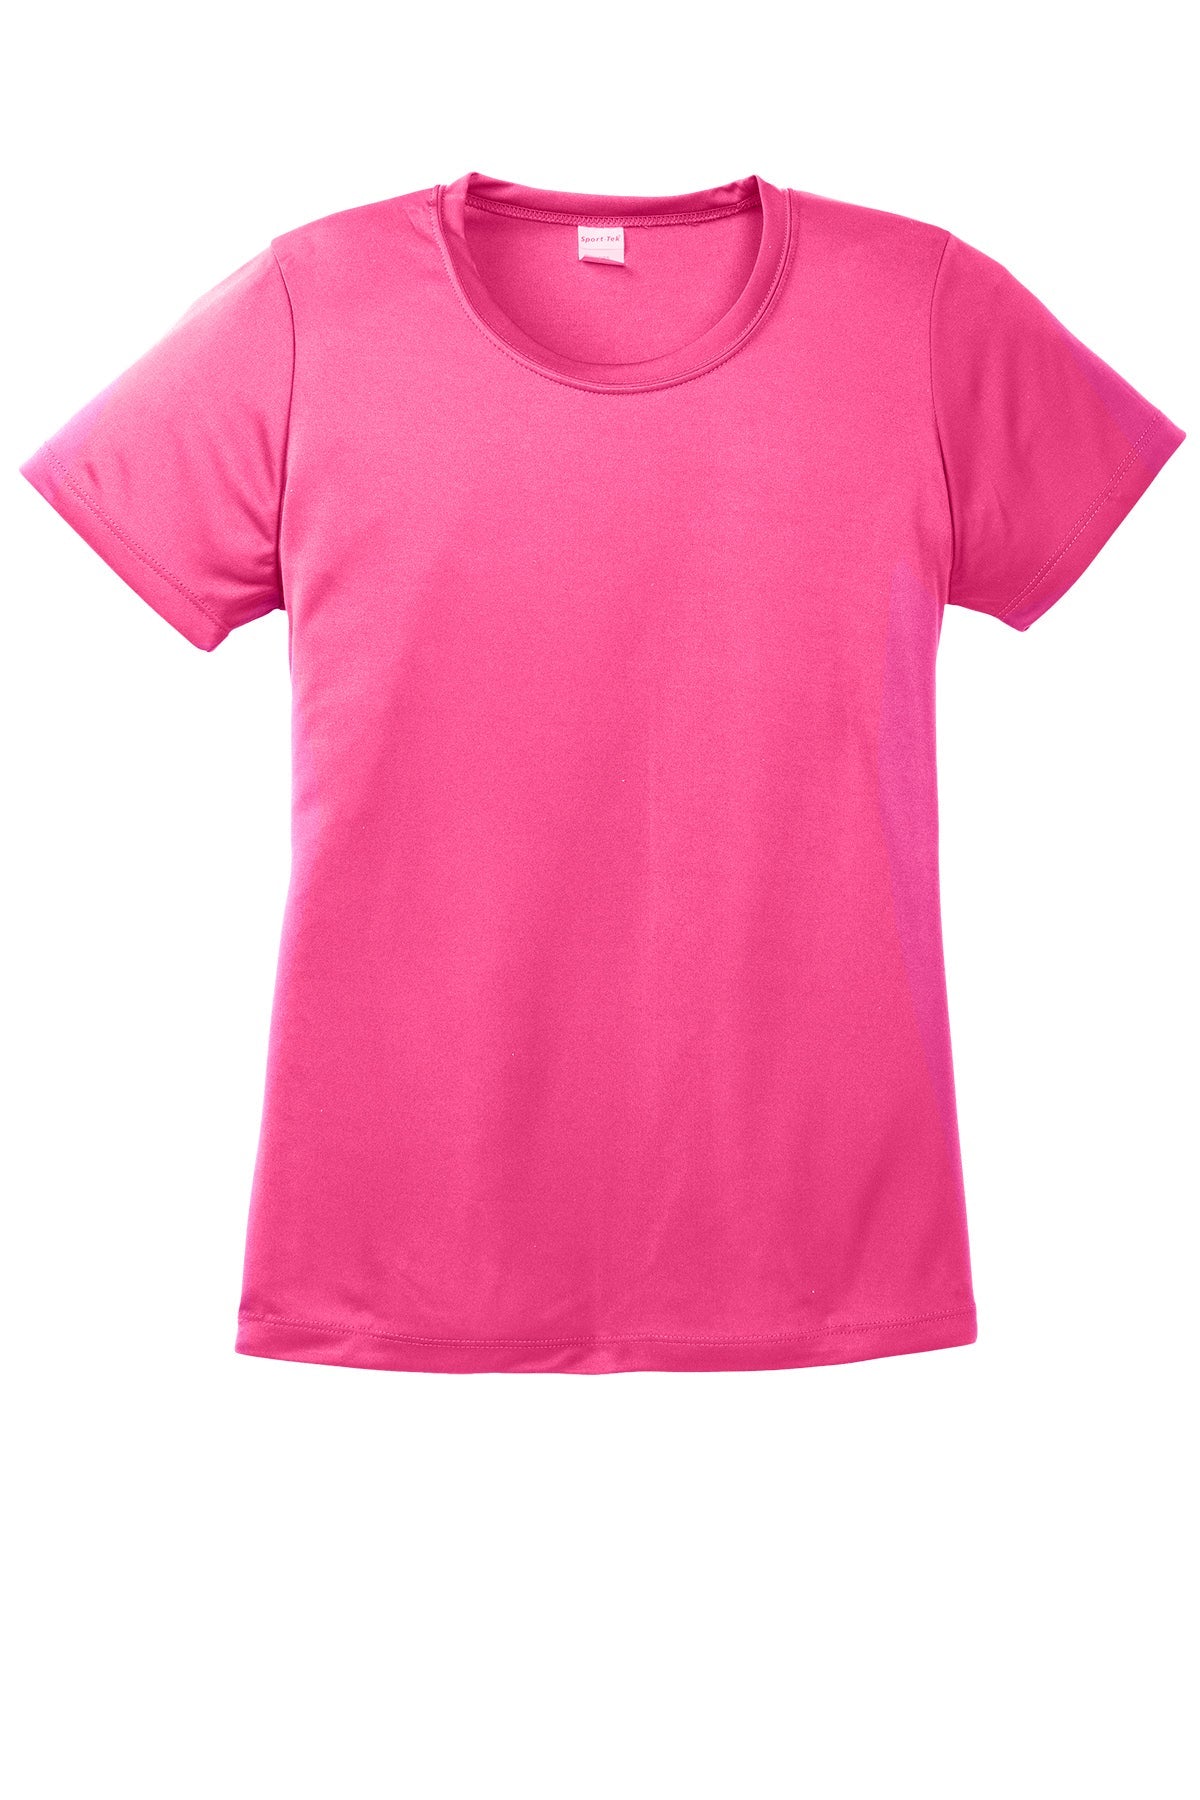 Sport-Tek Lst350 Polyester Ladies T-Shirt Ad Small / Neon Pink